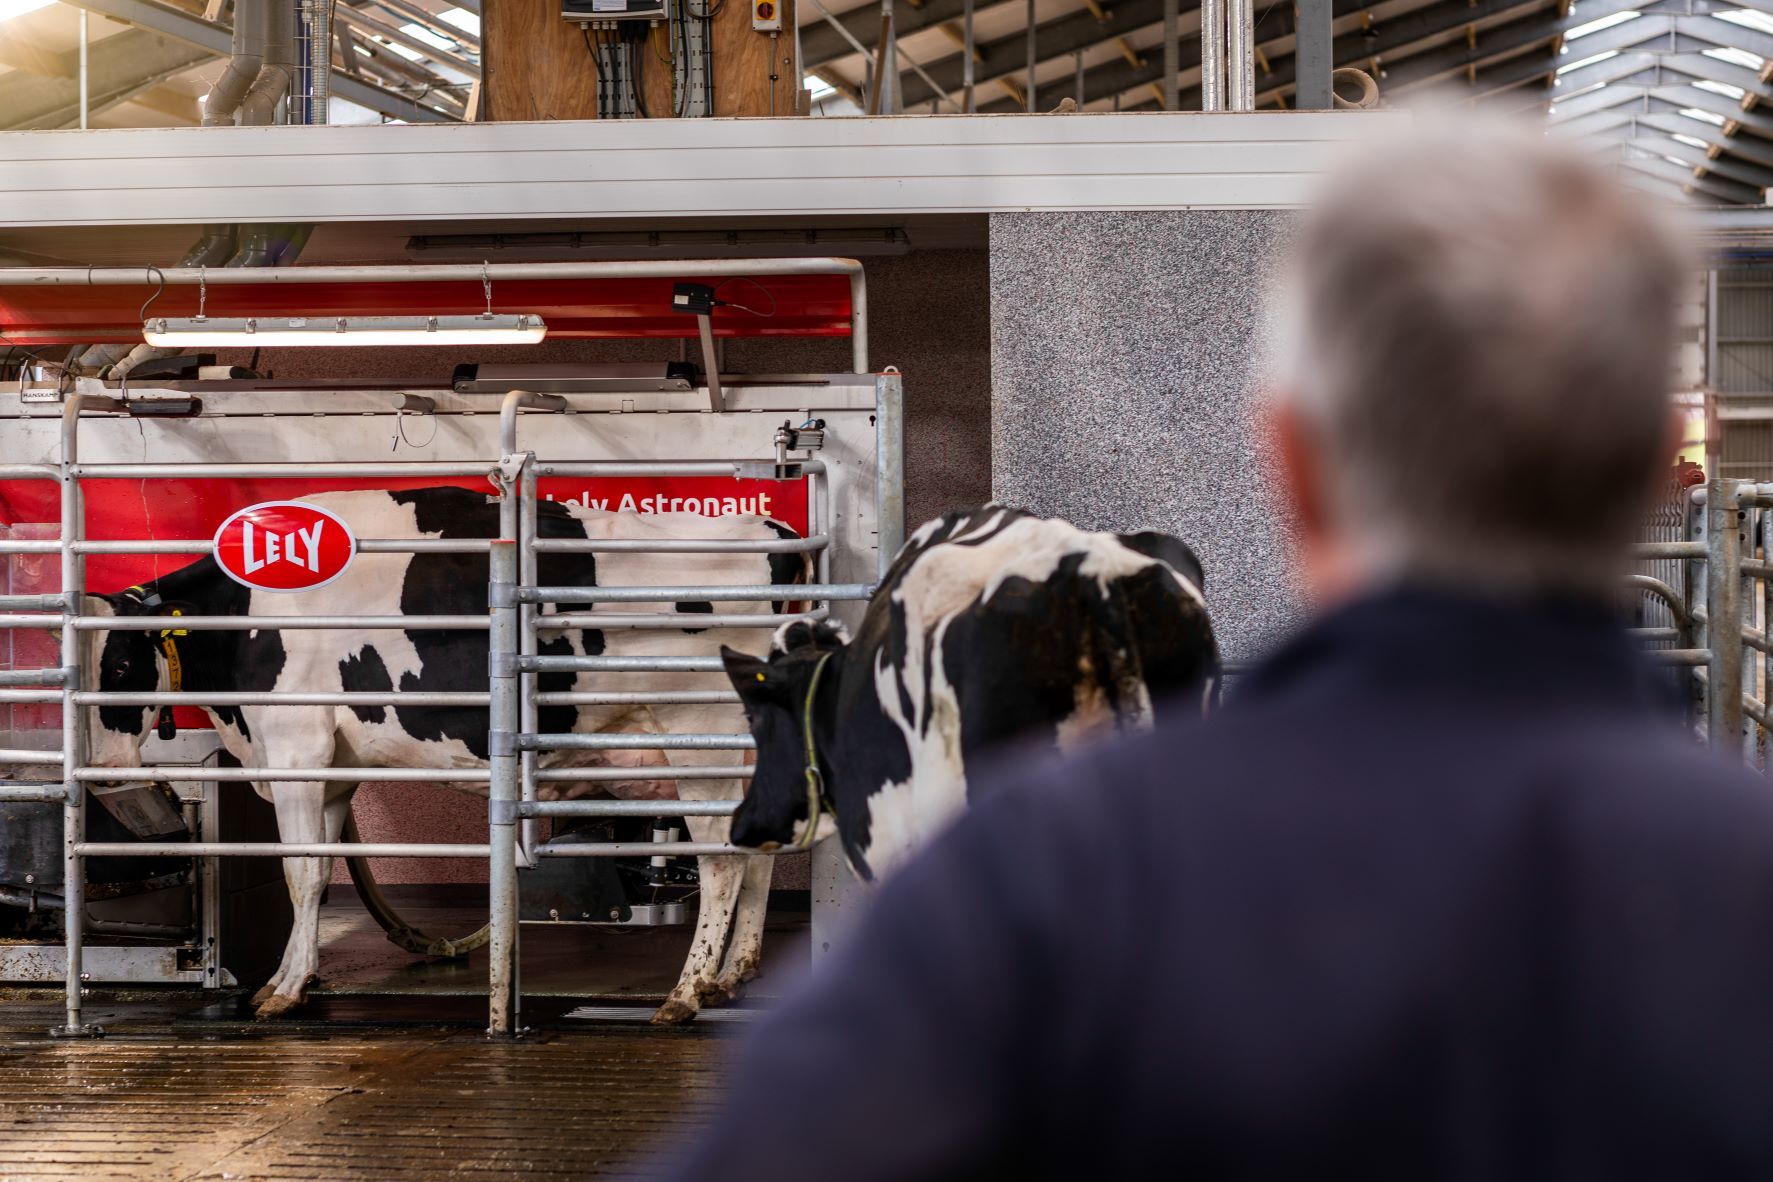 Cows readily queue up to be milked through the robotic machine where they are given concentrates according to yield